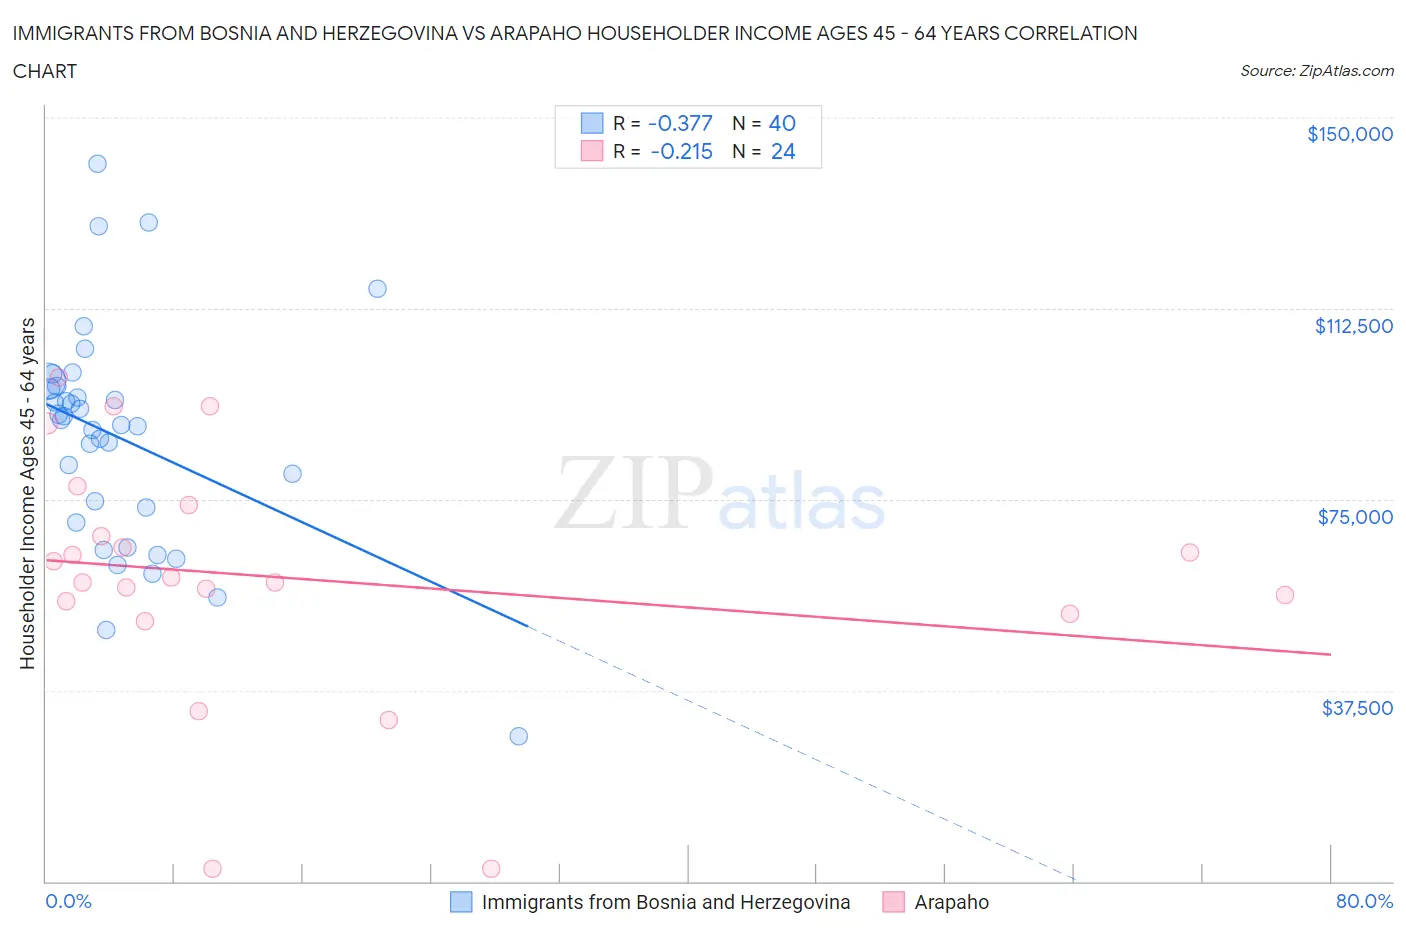 Immigrants from Bosnia and Herzegovina vs Arapaho Householder Income Ages 45 - 64 years